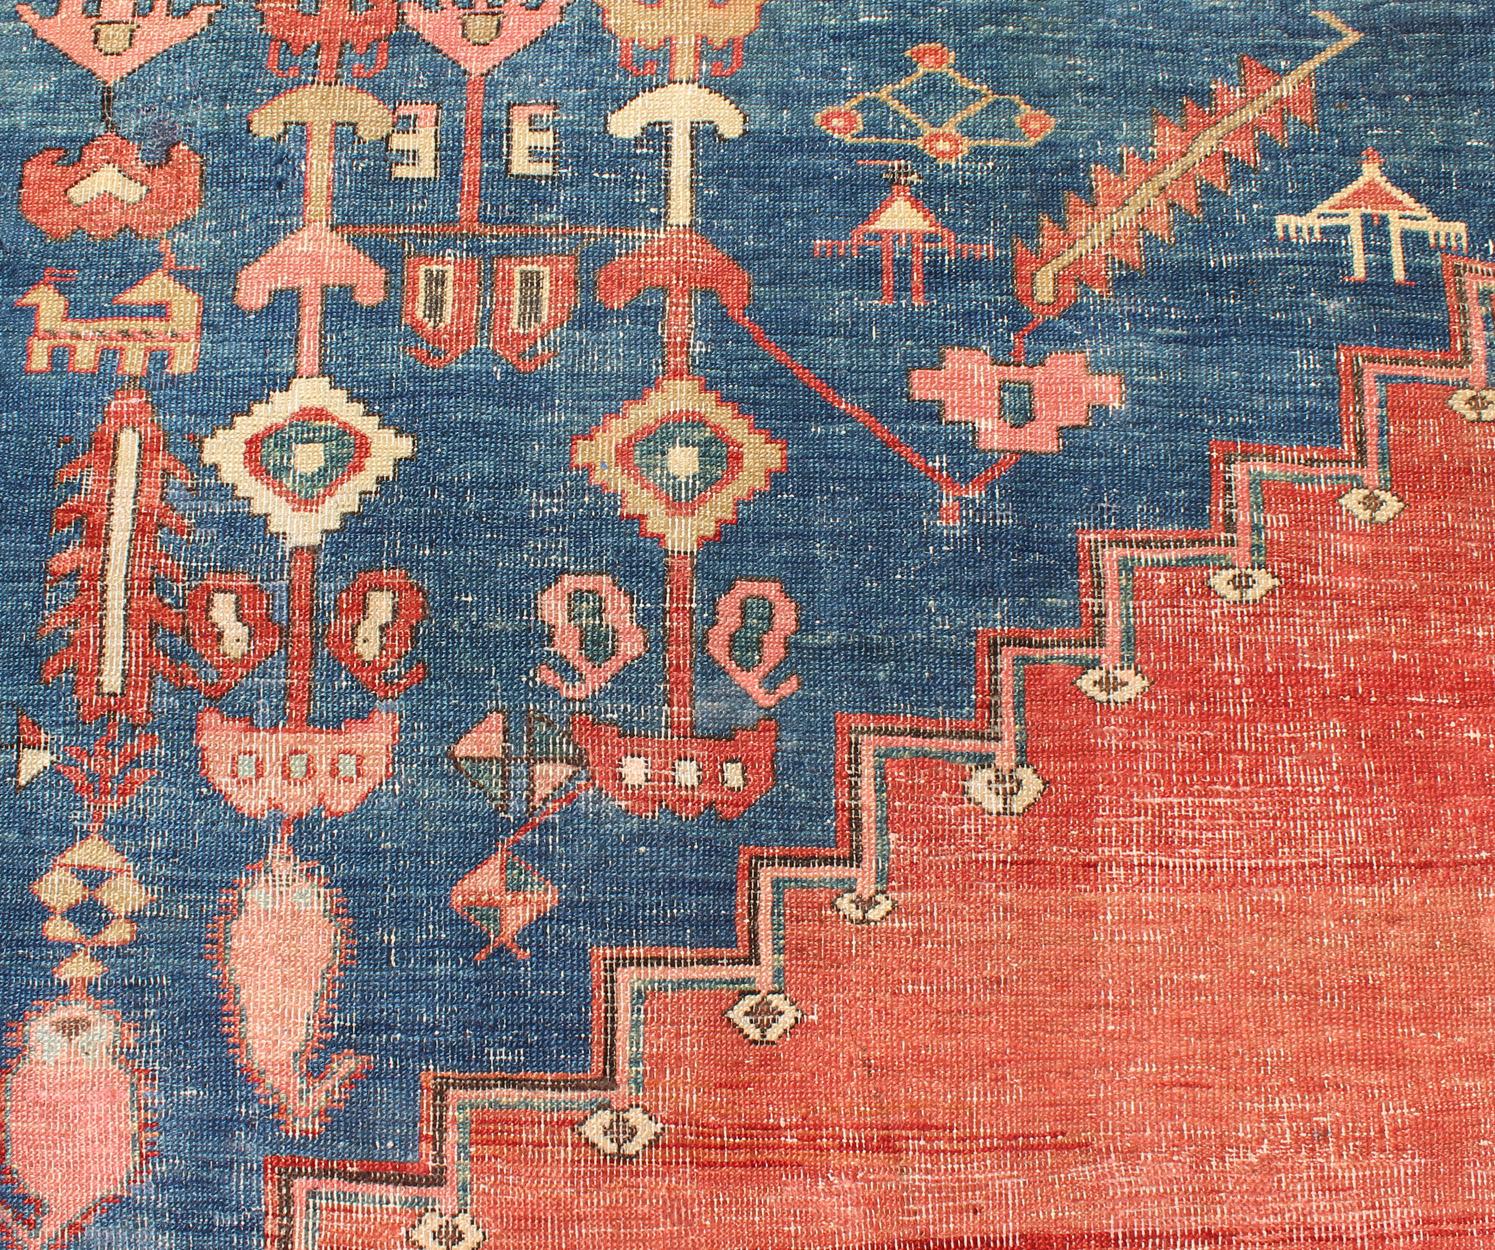 Finely Woven 19th Century Antique Persian Bakhshaiesh Rug in Rust Red and Blue For Sale 7